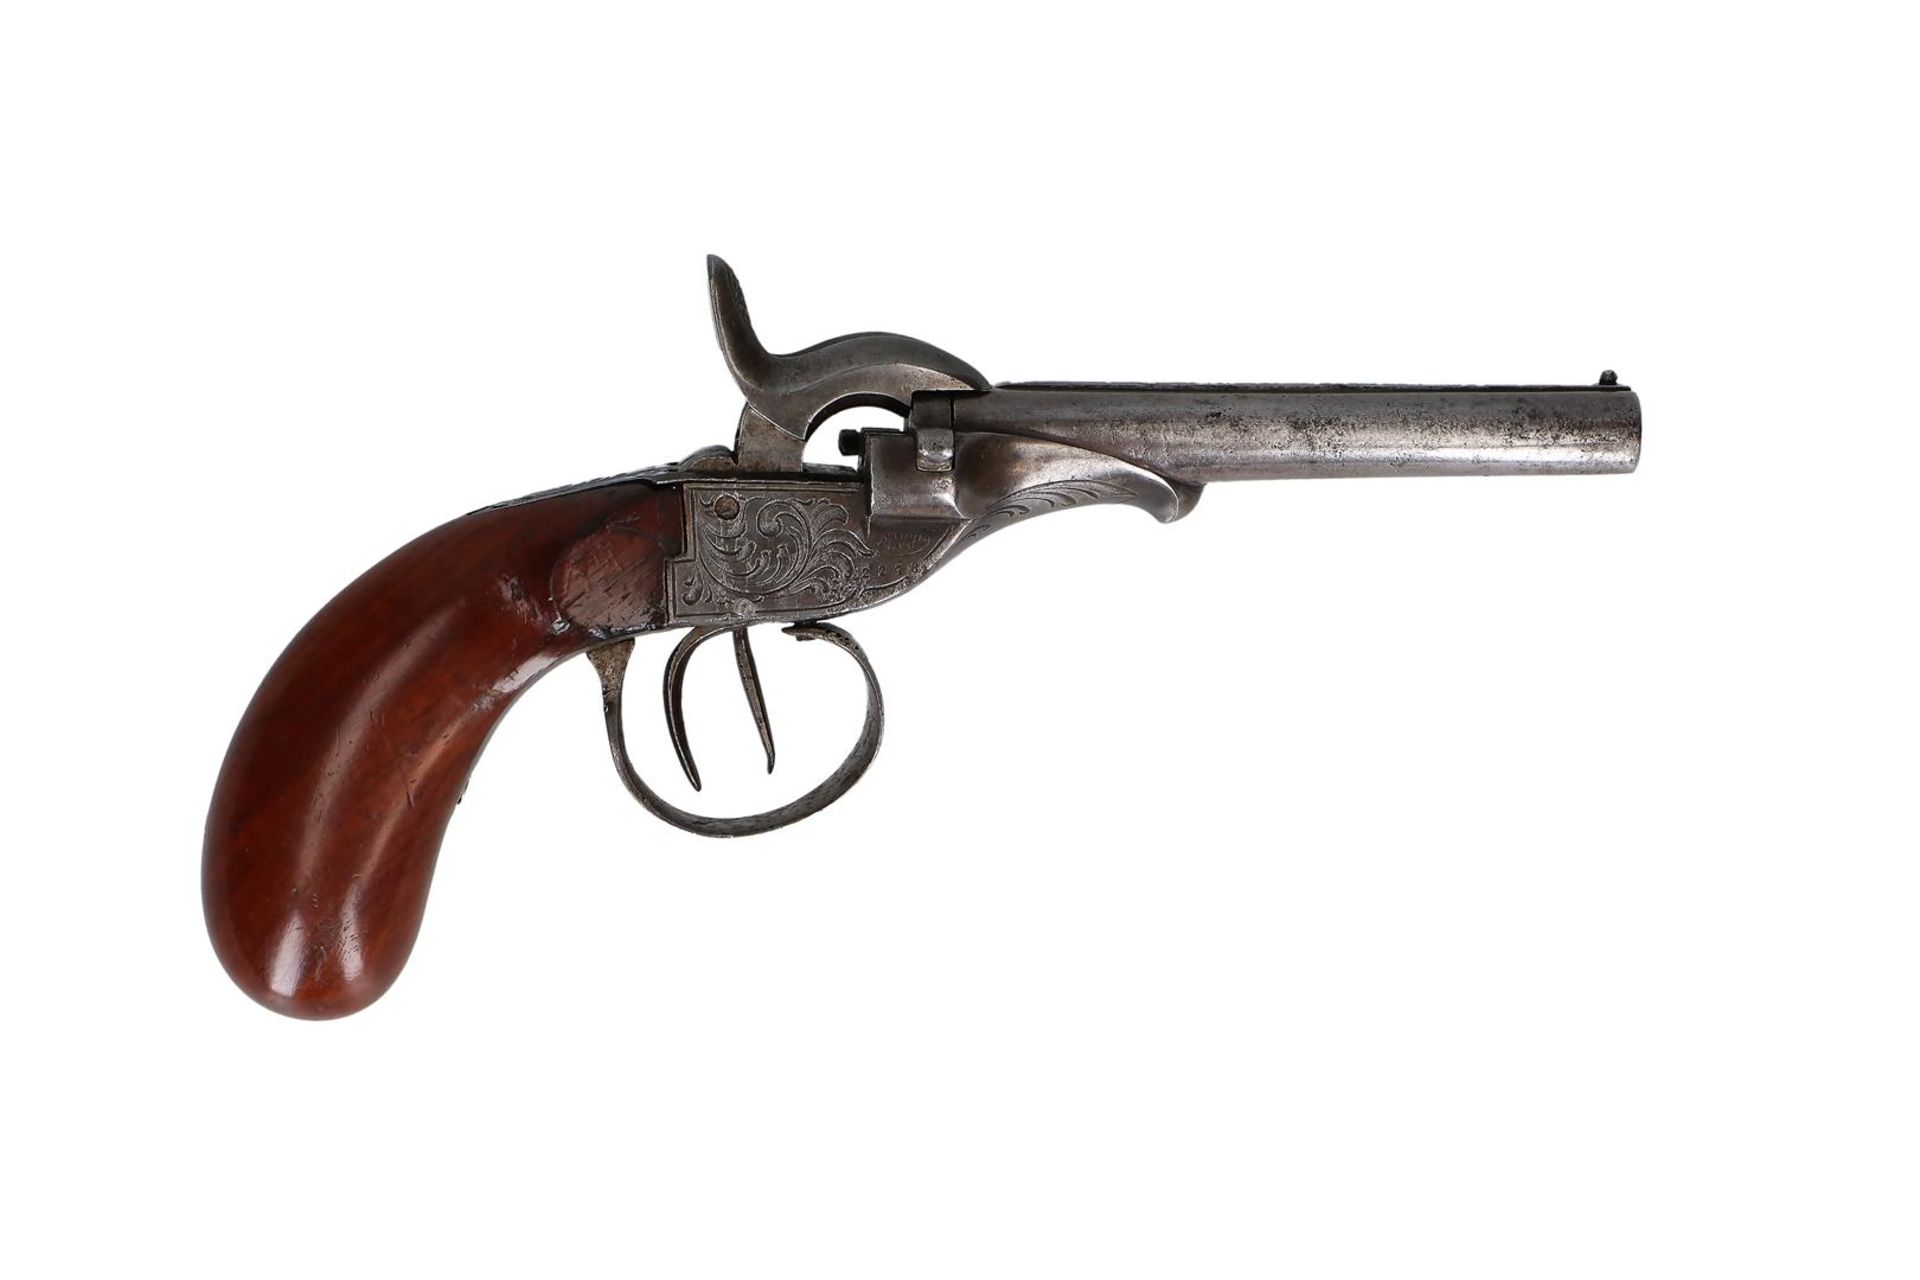 A pinfire side by side double barreled pistol. Boxlock frame with large size scroll engraving.